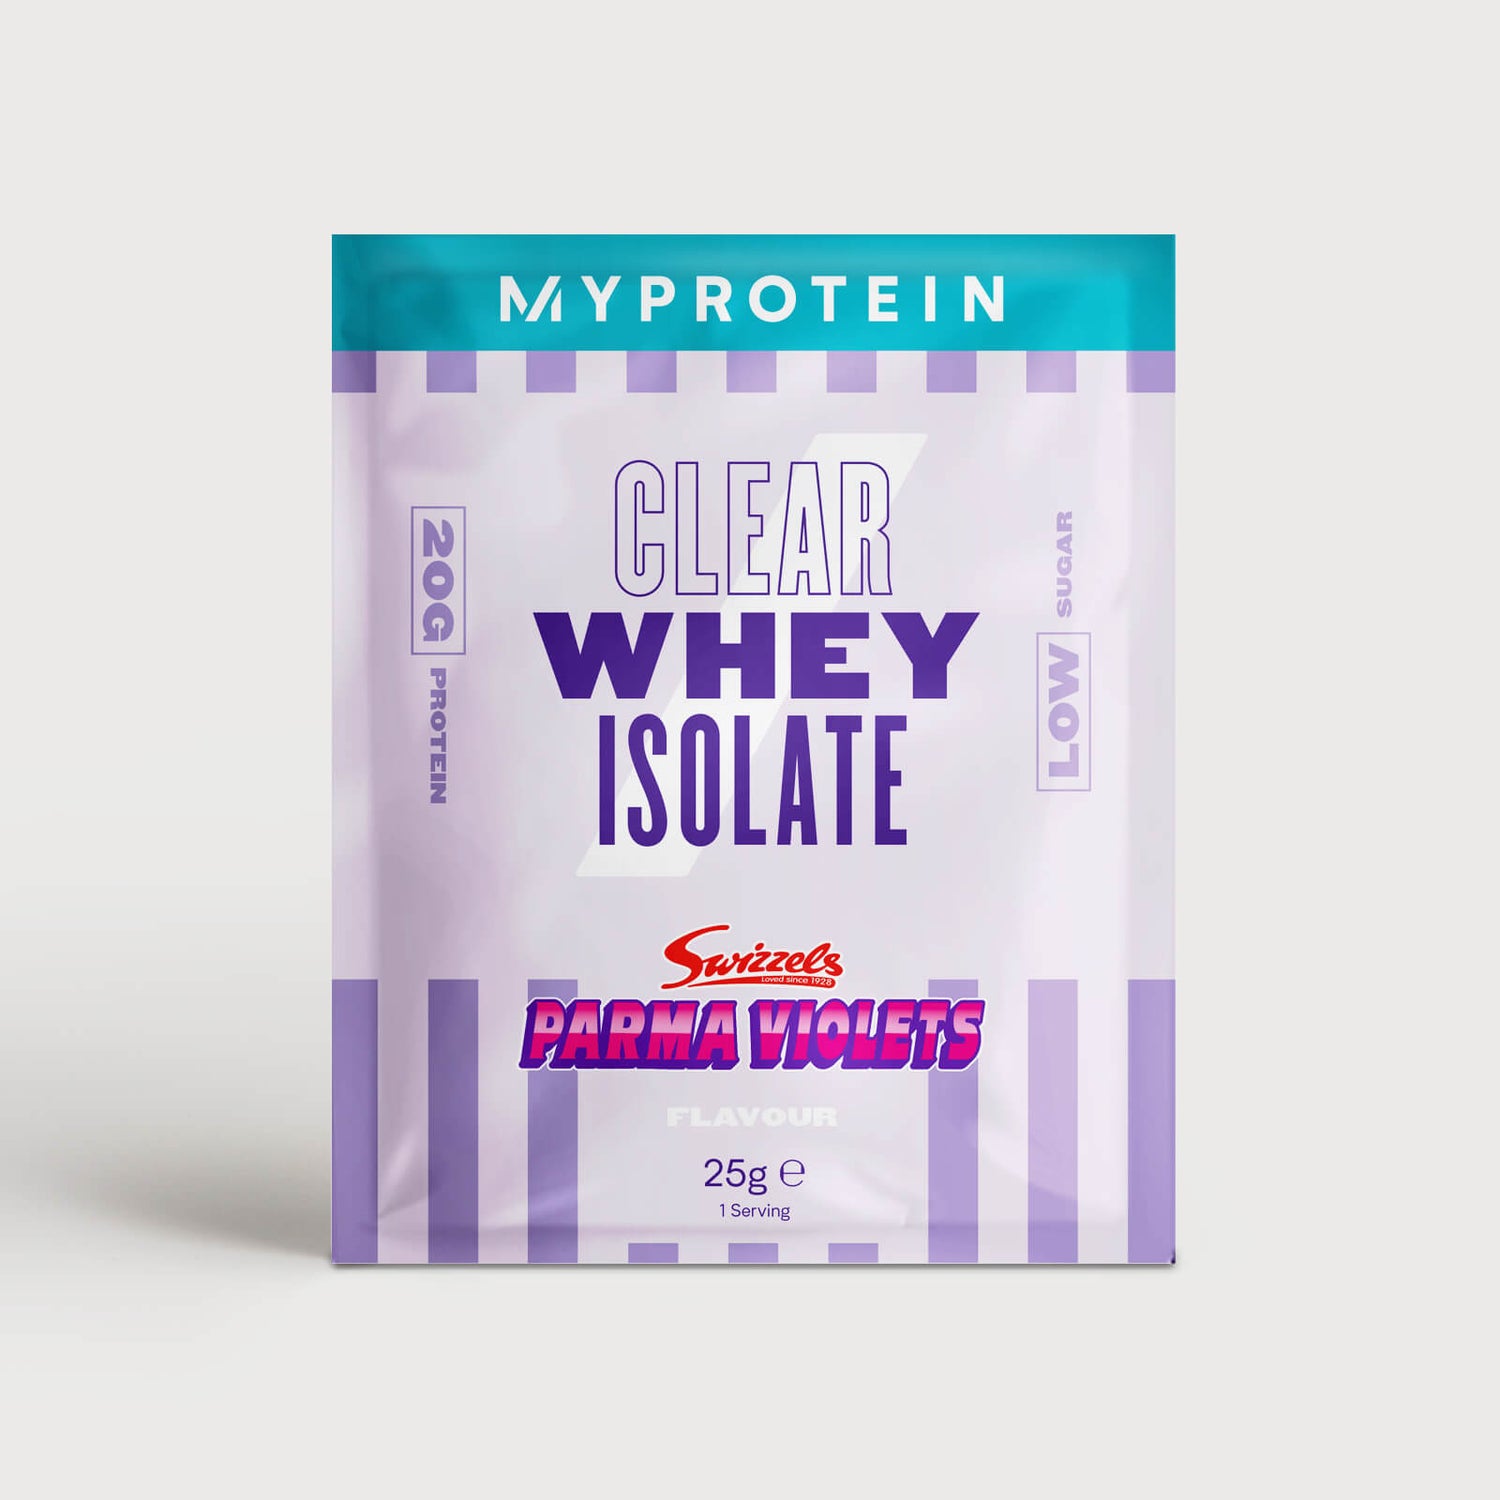 Myprotein Clear Whey Isolate Swizzels Edition (Sample) - 1servings - Parma Violets